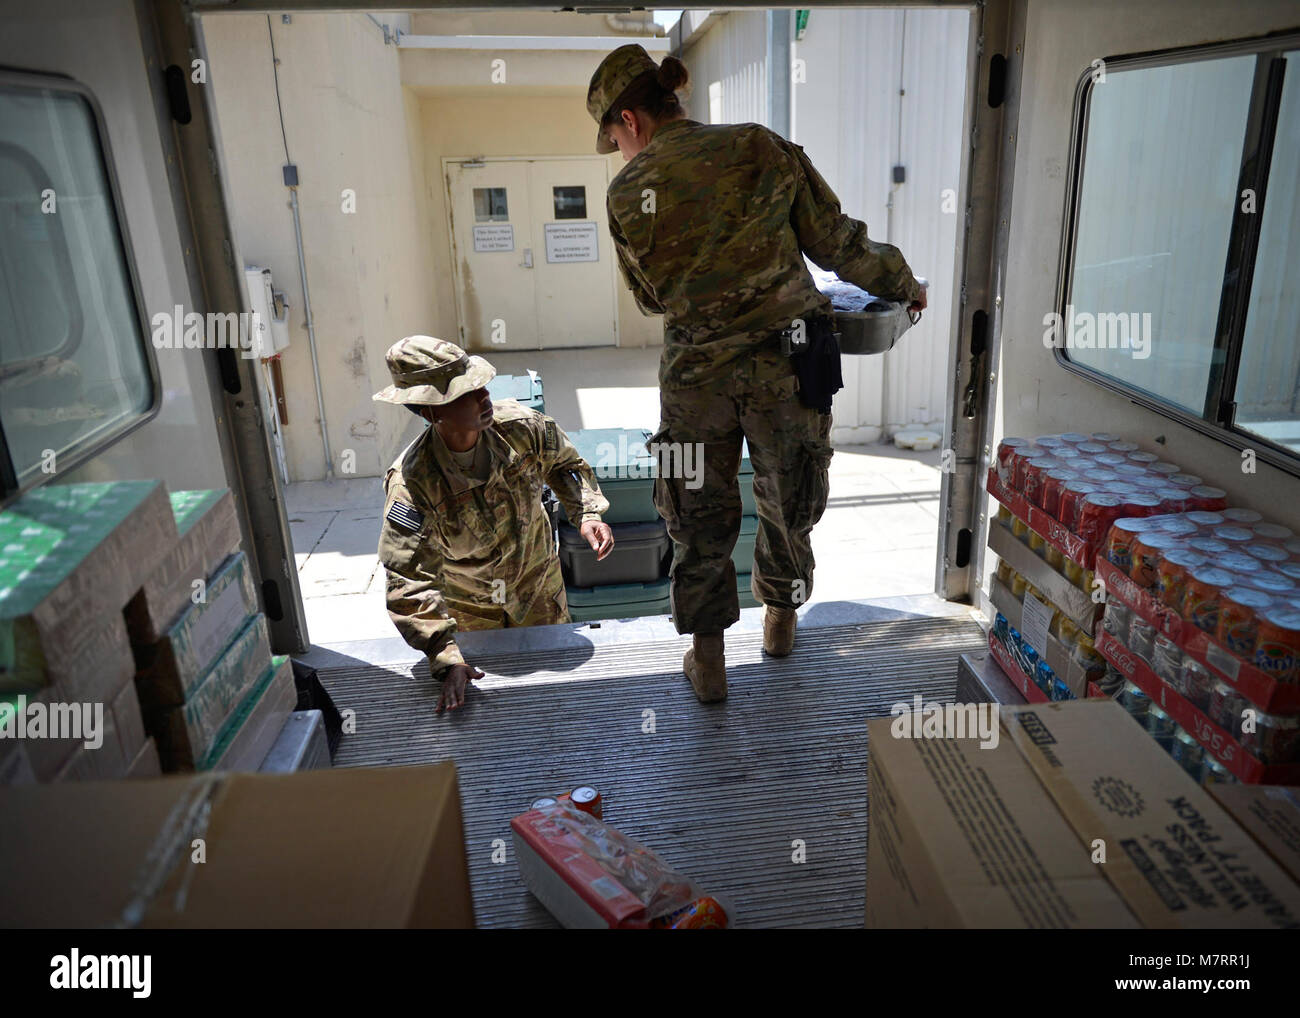 (From left) U.S. Air Force Master Sgt. Janet Budzinack, 455th Expeditionary Medical Support Squadron nutritional medicine flight chief and Staff Sgt. Dawn Spence, , 455th EMSS nutritional medicine diet technician unload meals off a truck for patients at Craig Joint Theater Hospital May 13 at Bagram Airfield, Afghanistan.  As part of nutritional medicine, they provide nutritional care and quality foodservice while promoting military readiness and community wellness. Budzinack is deployed from Wright-Patterson Air Force Base, Ohio and a native of Fontana, Calif. Spence is deployed from Lackland  Stock Photo